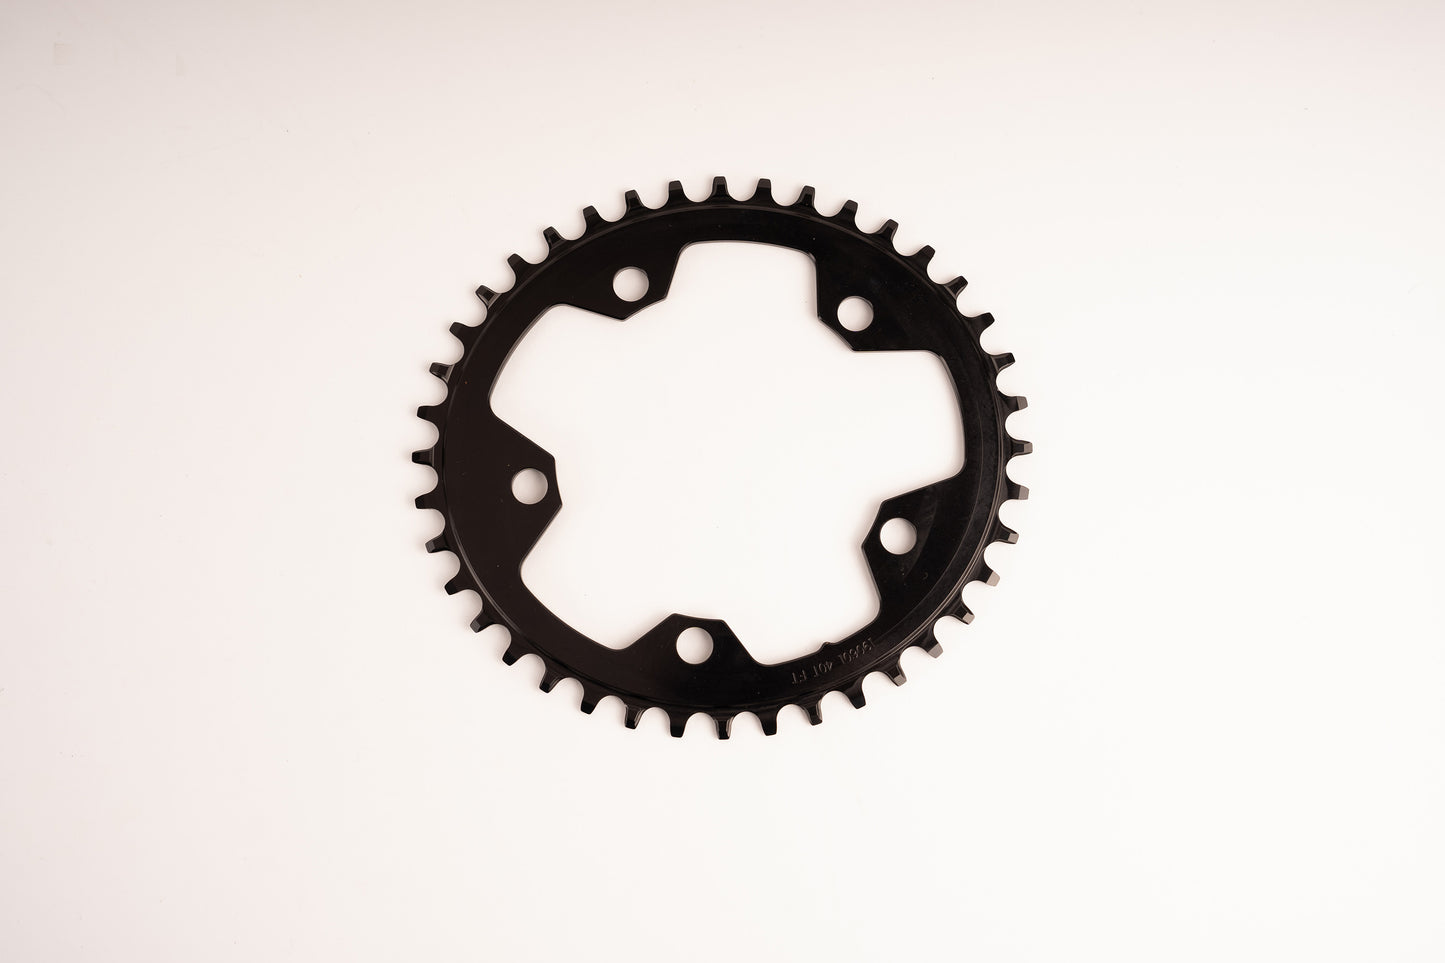 Wolf Tooth Elliptical 110 BCD Chainring - 40t, 110 BCD, 5-Bolt, Drop-Stop, Black